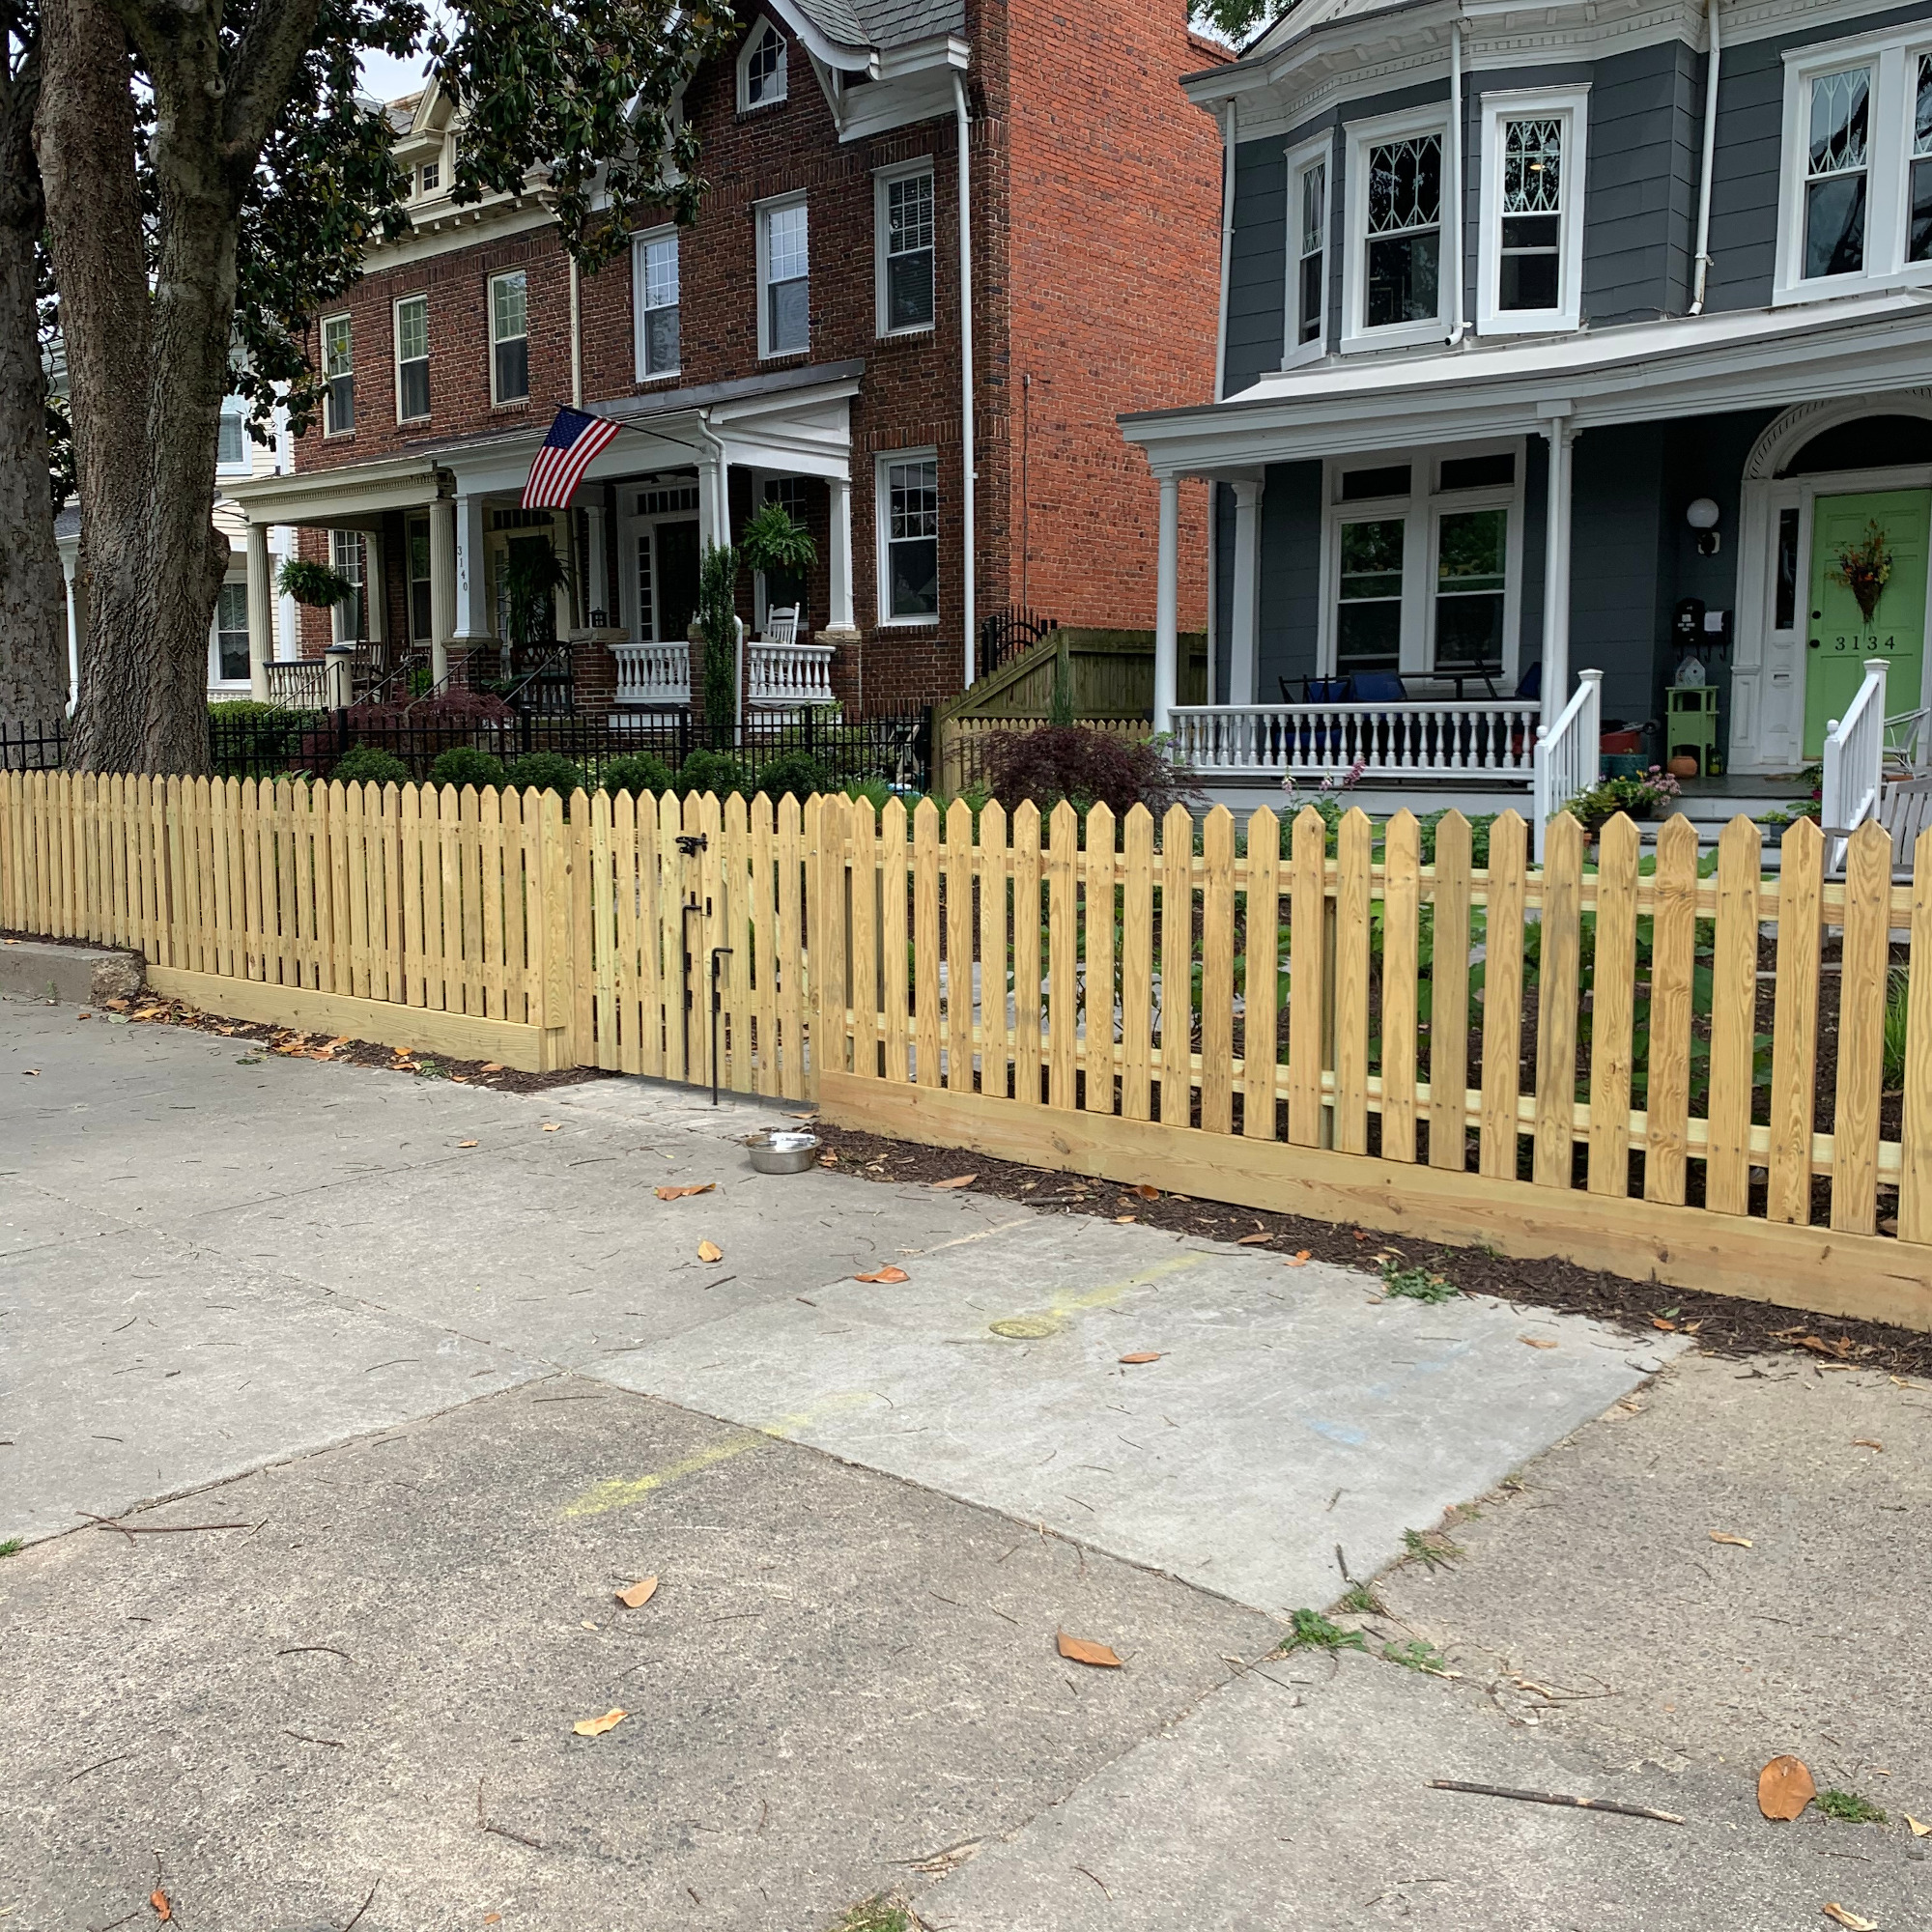 4 foot high 45 degree pointed wood picket fence.